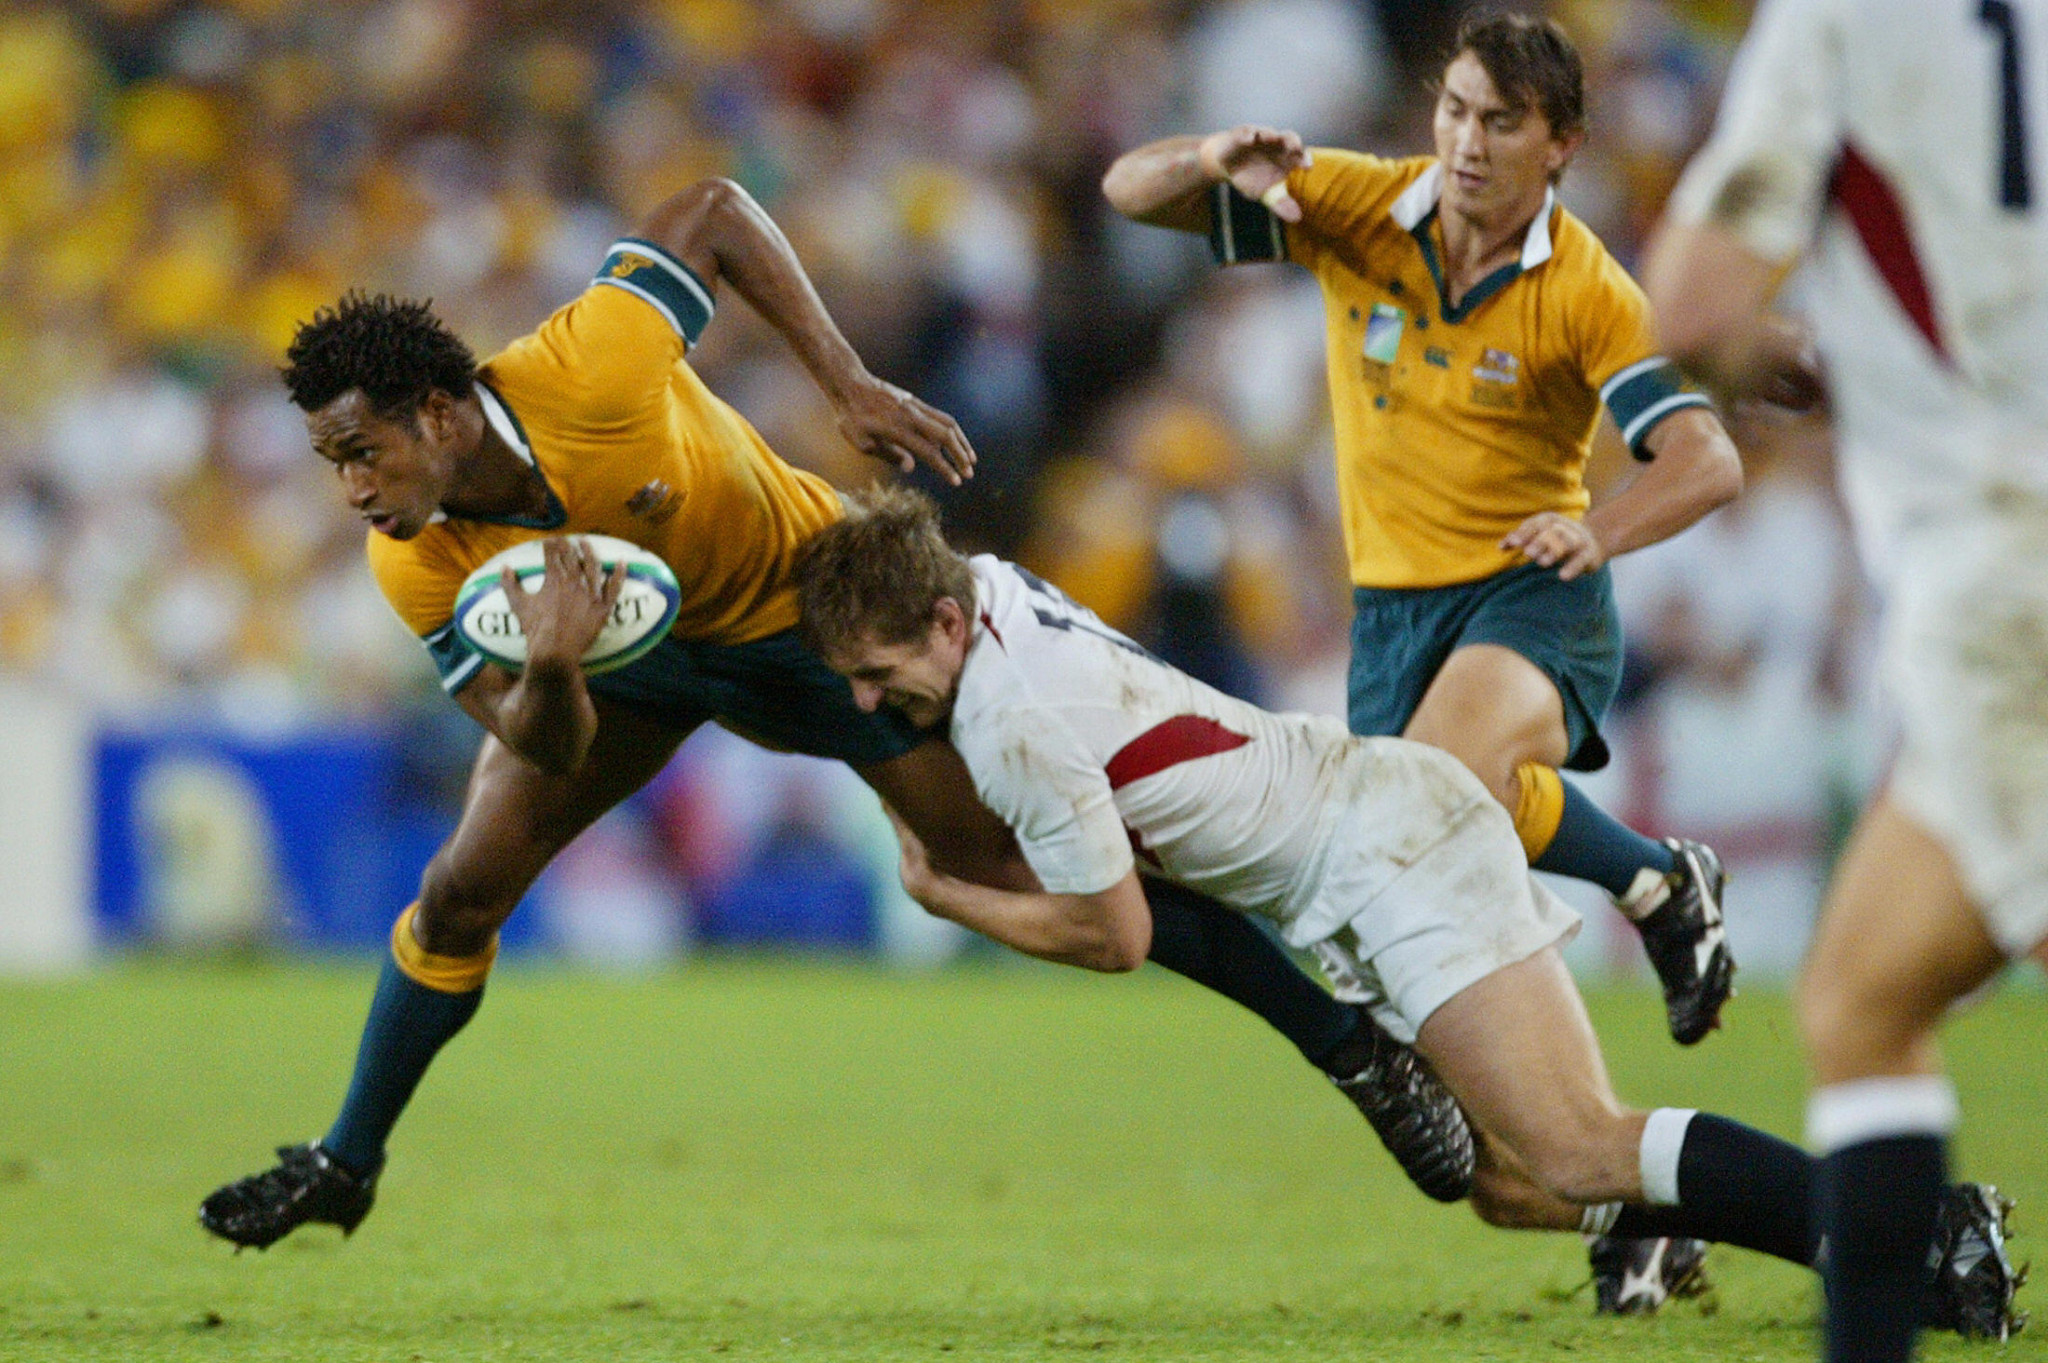 Australia hosted the 2003 Rugby World Cup ©Getty Images